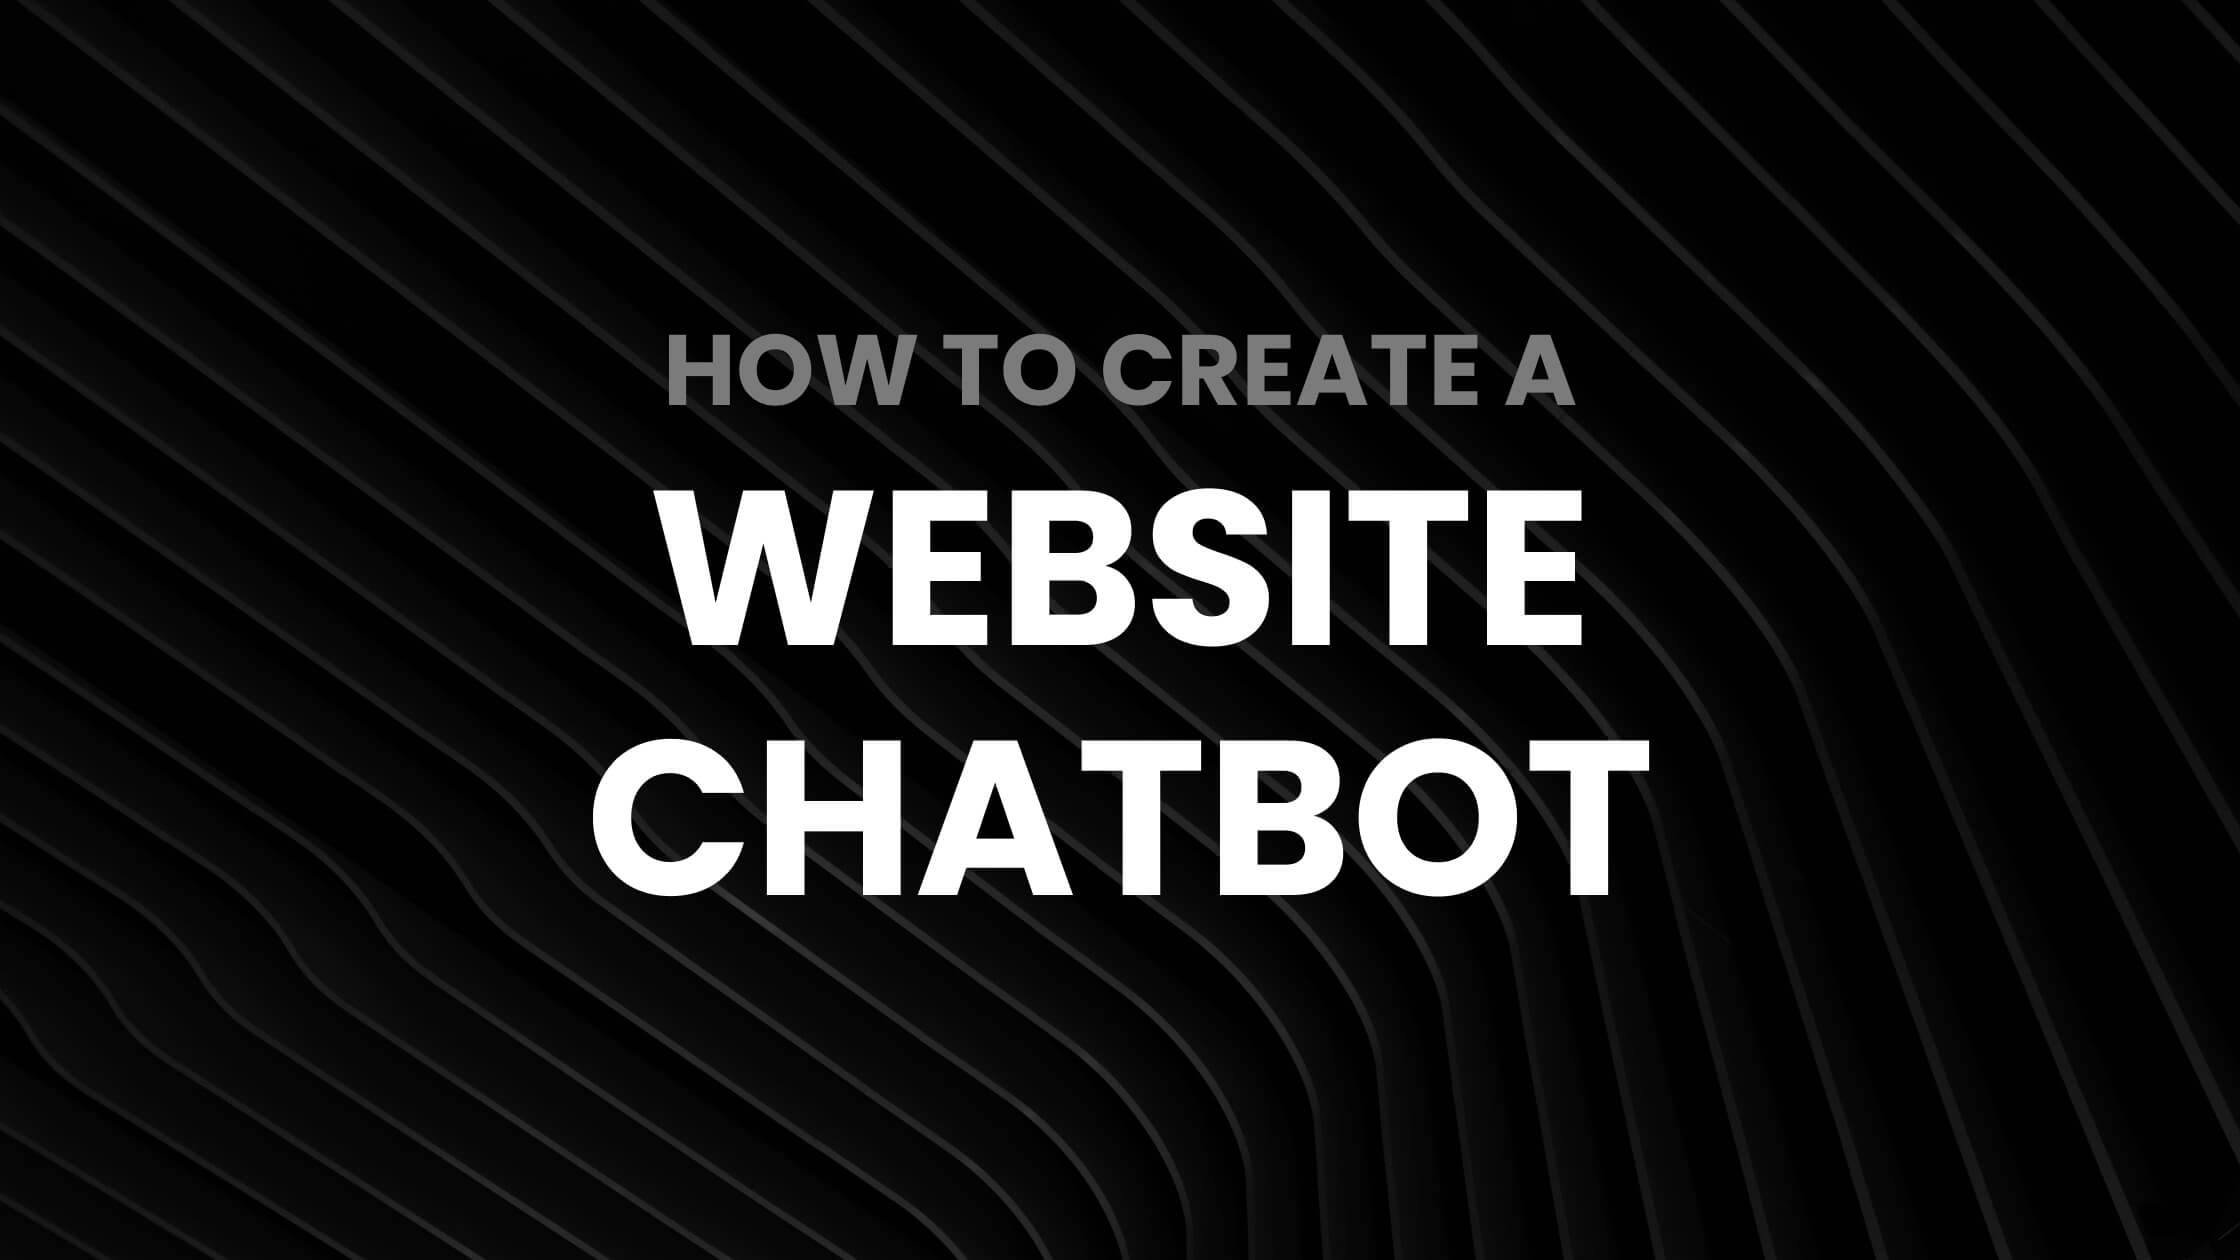 Here’s Our Guide on How to Create a Chatbot For Your Website